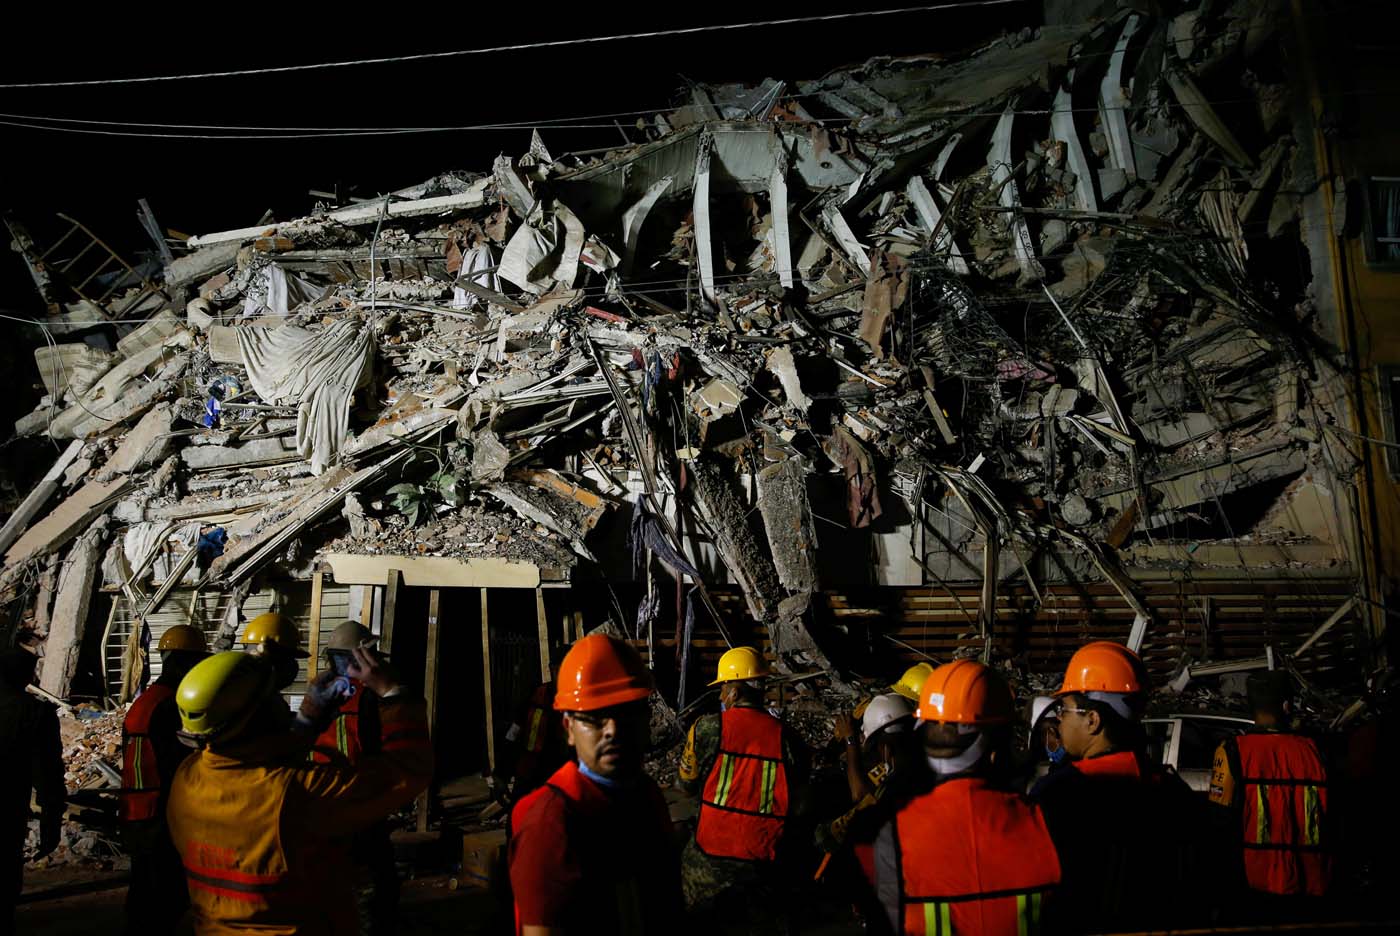 REFILE - REMOVING TYPO - Rescuers work at the site of a collapsed building after an earthquake in Mexico City, Mexico September 20, 2017. REUTERS/Henry Romero